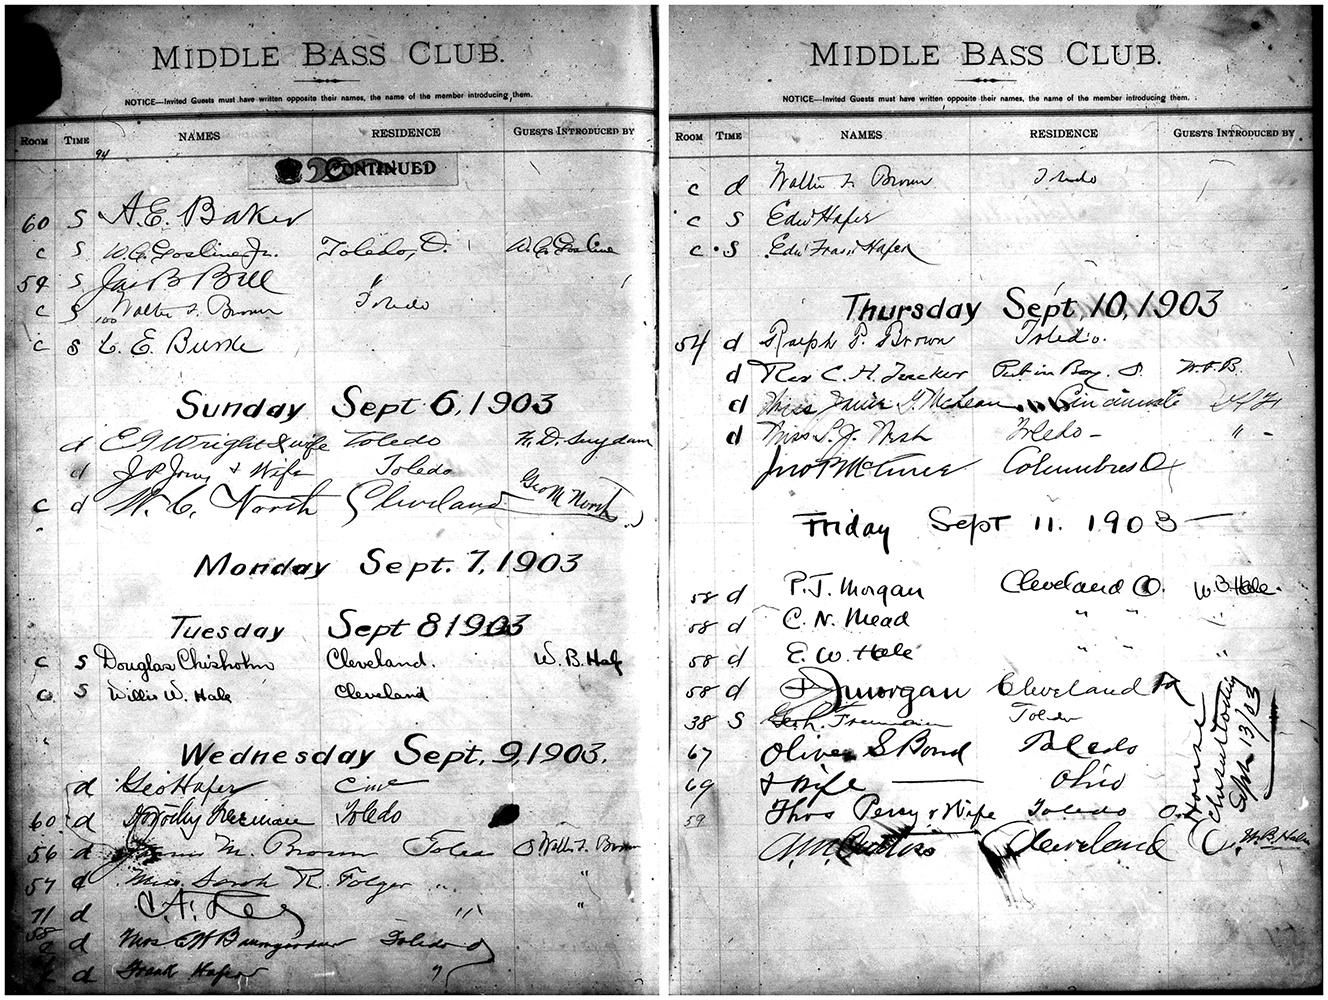 Middle Bass Club Guest Register entry: September 9. 1903